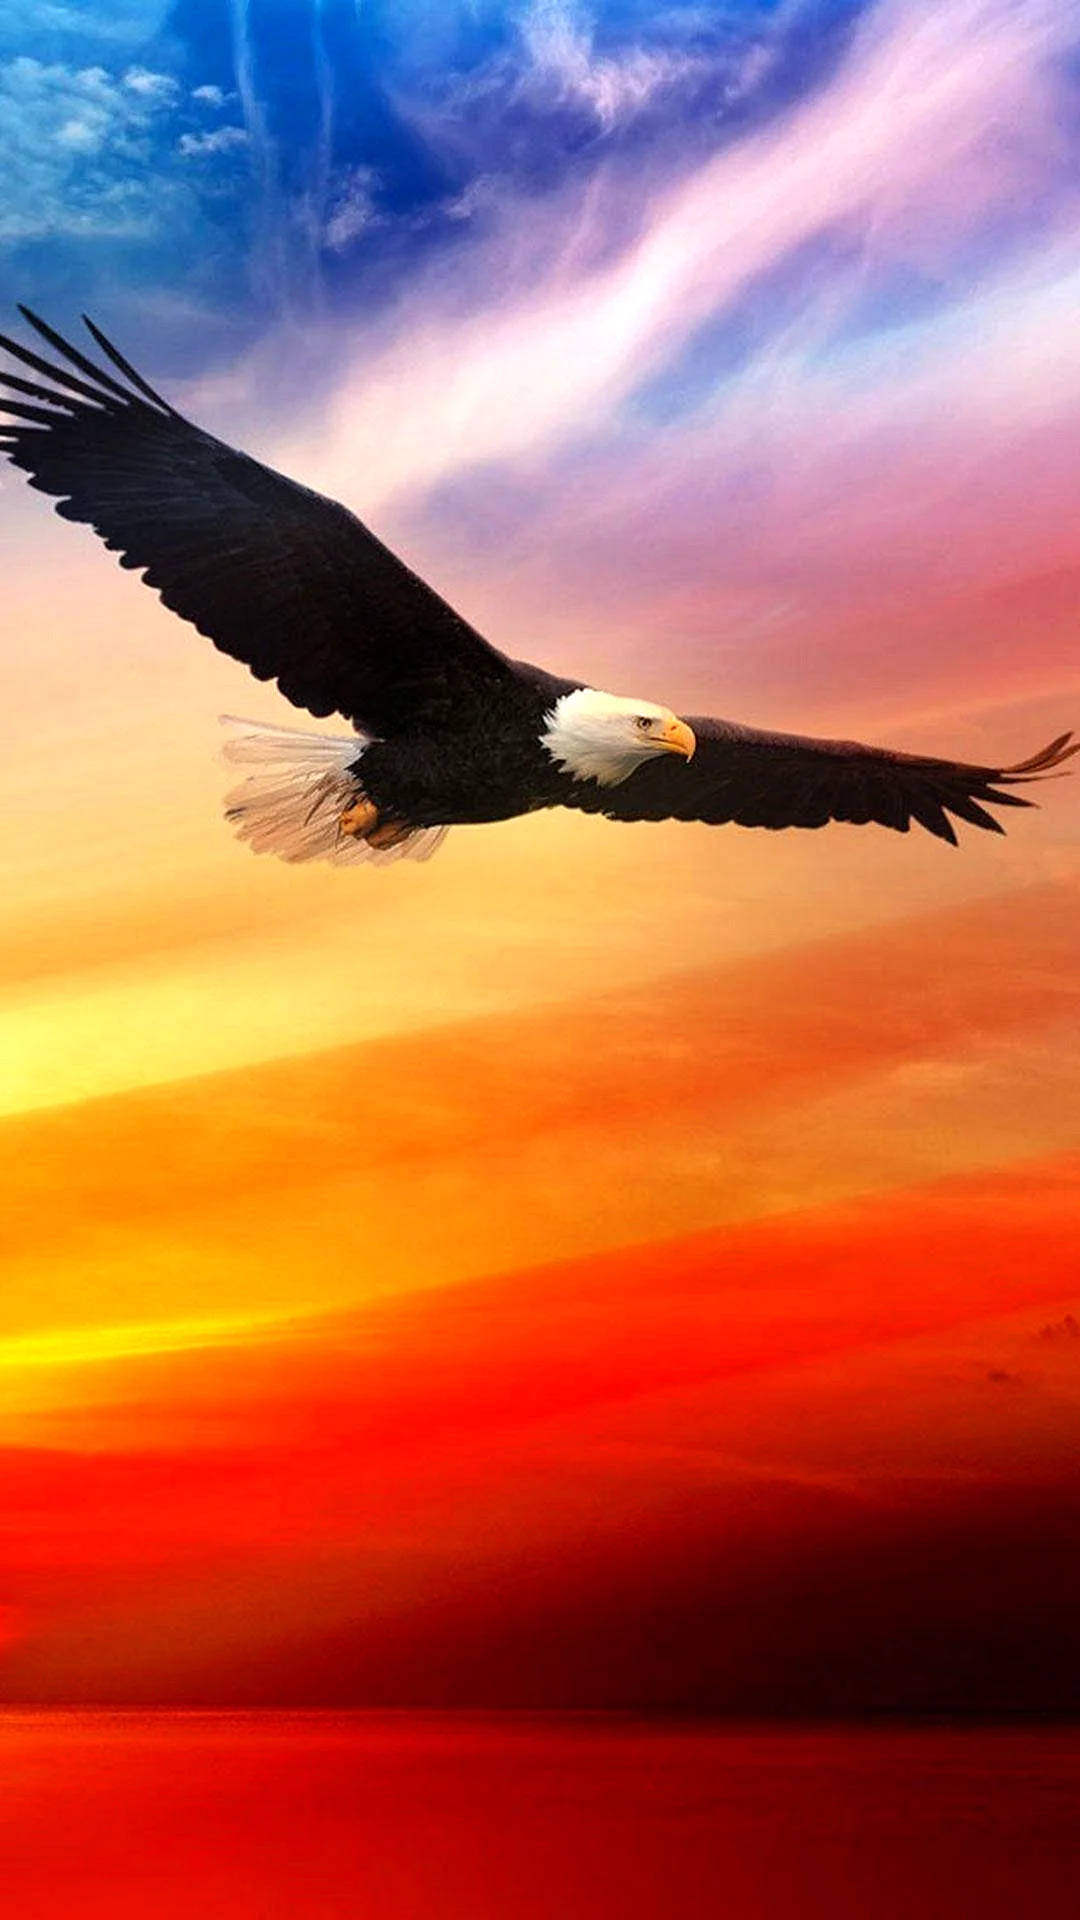 Soaring Eagle Wallpaper For iPhone